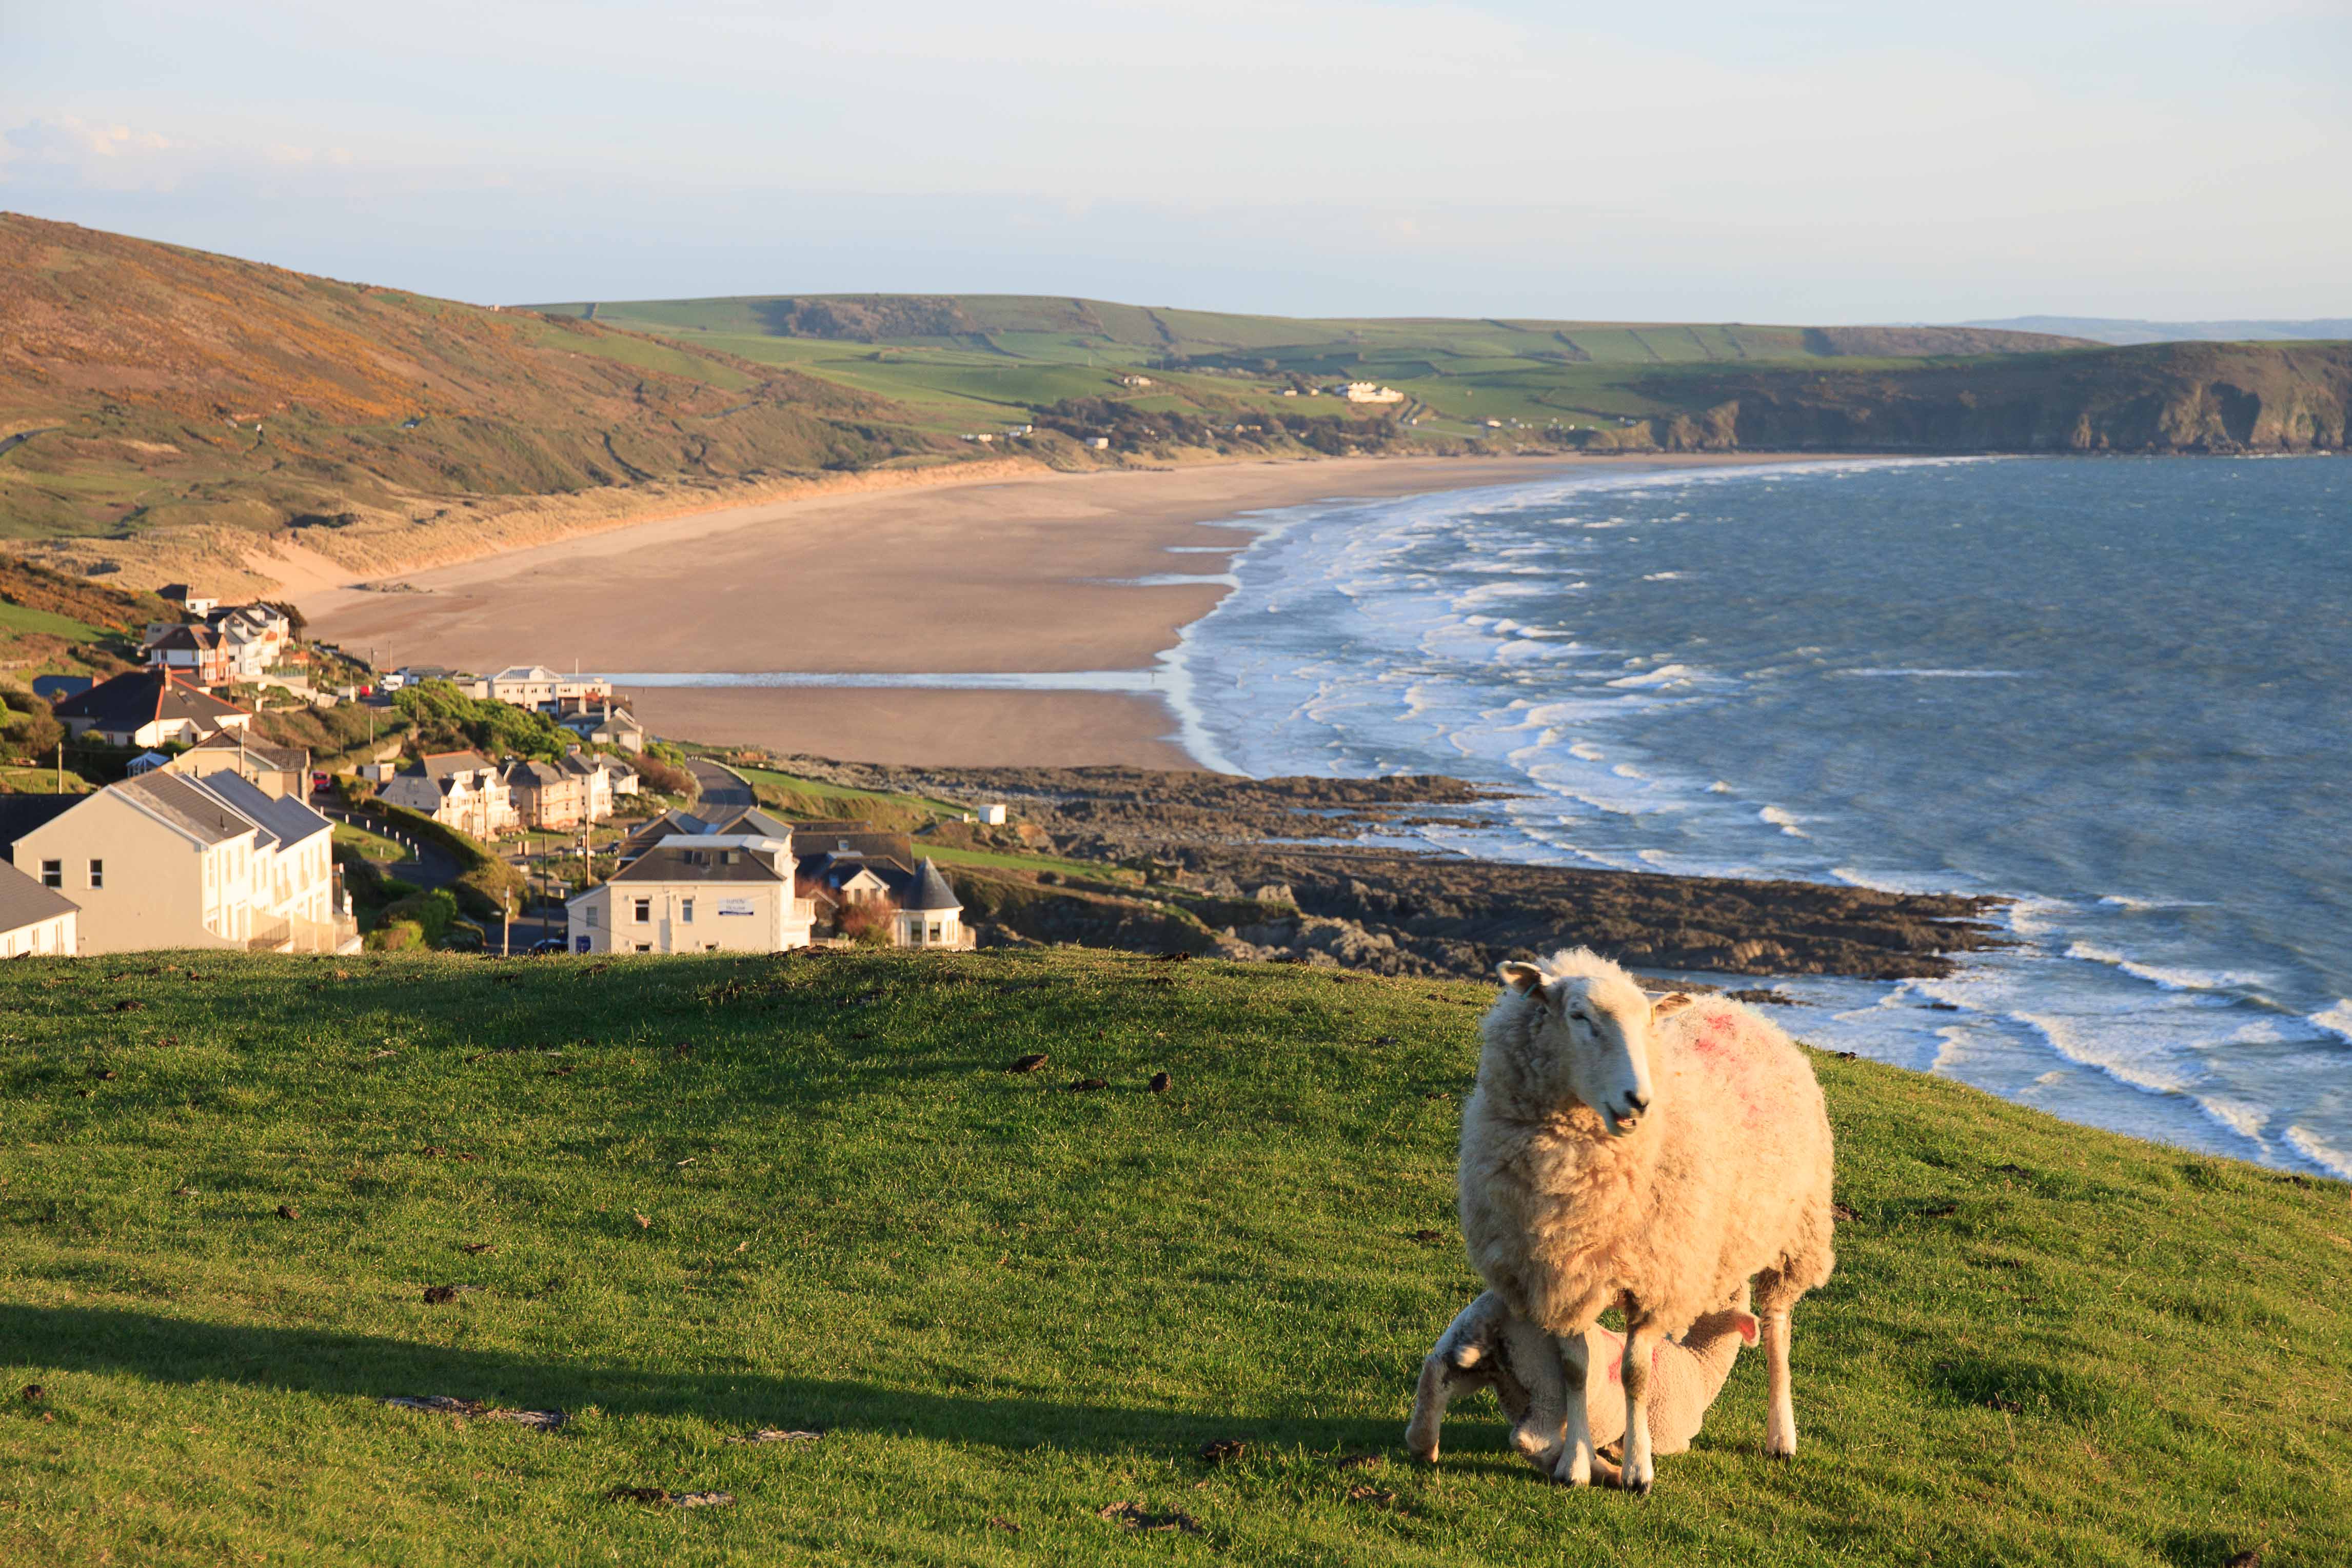 Woolacombe and Putsborough Beach from Morthoe. April 2015.